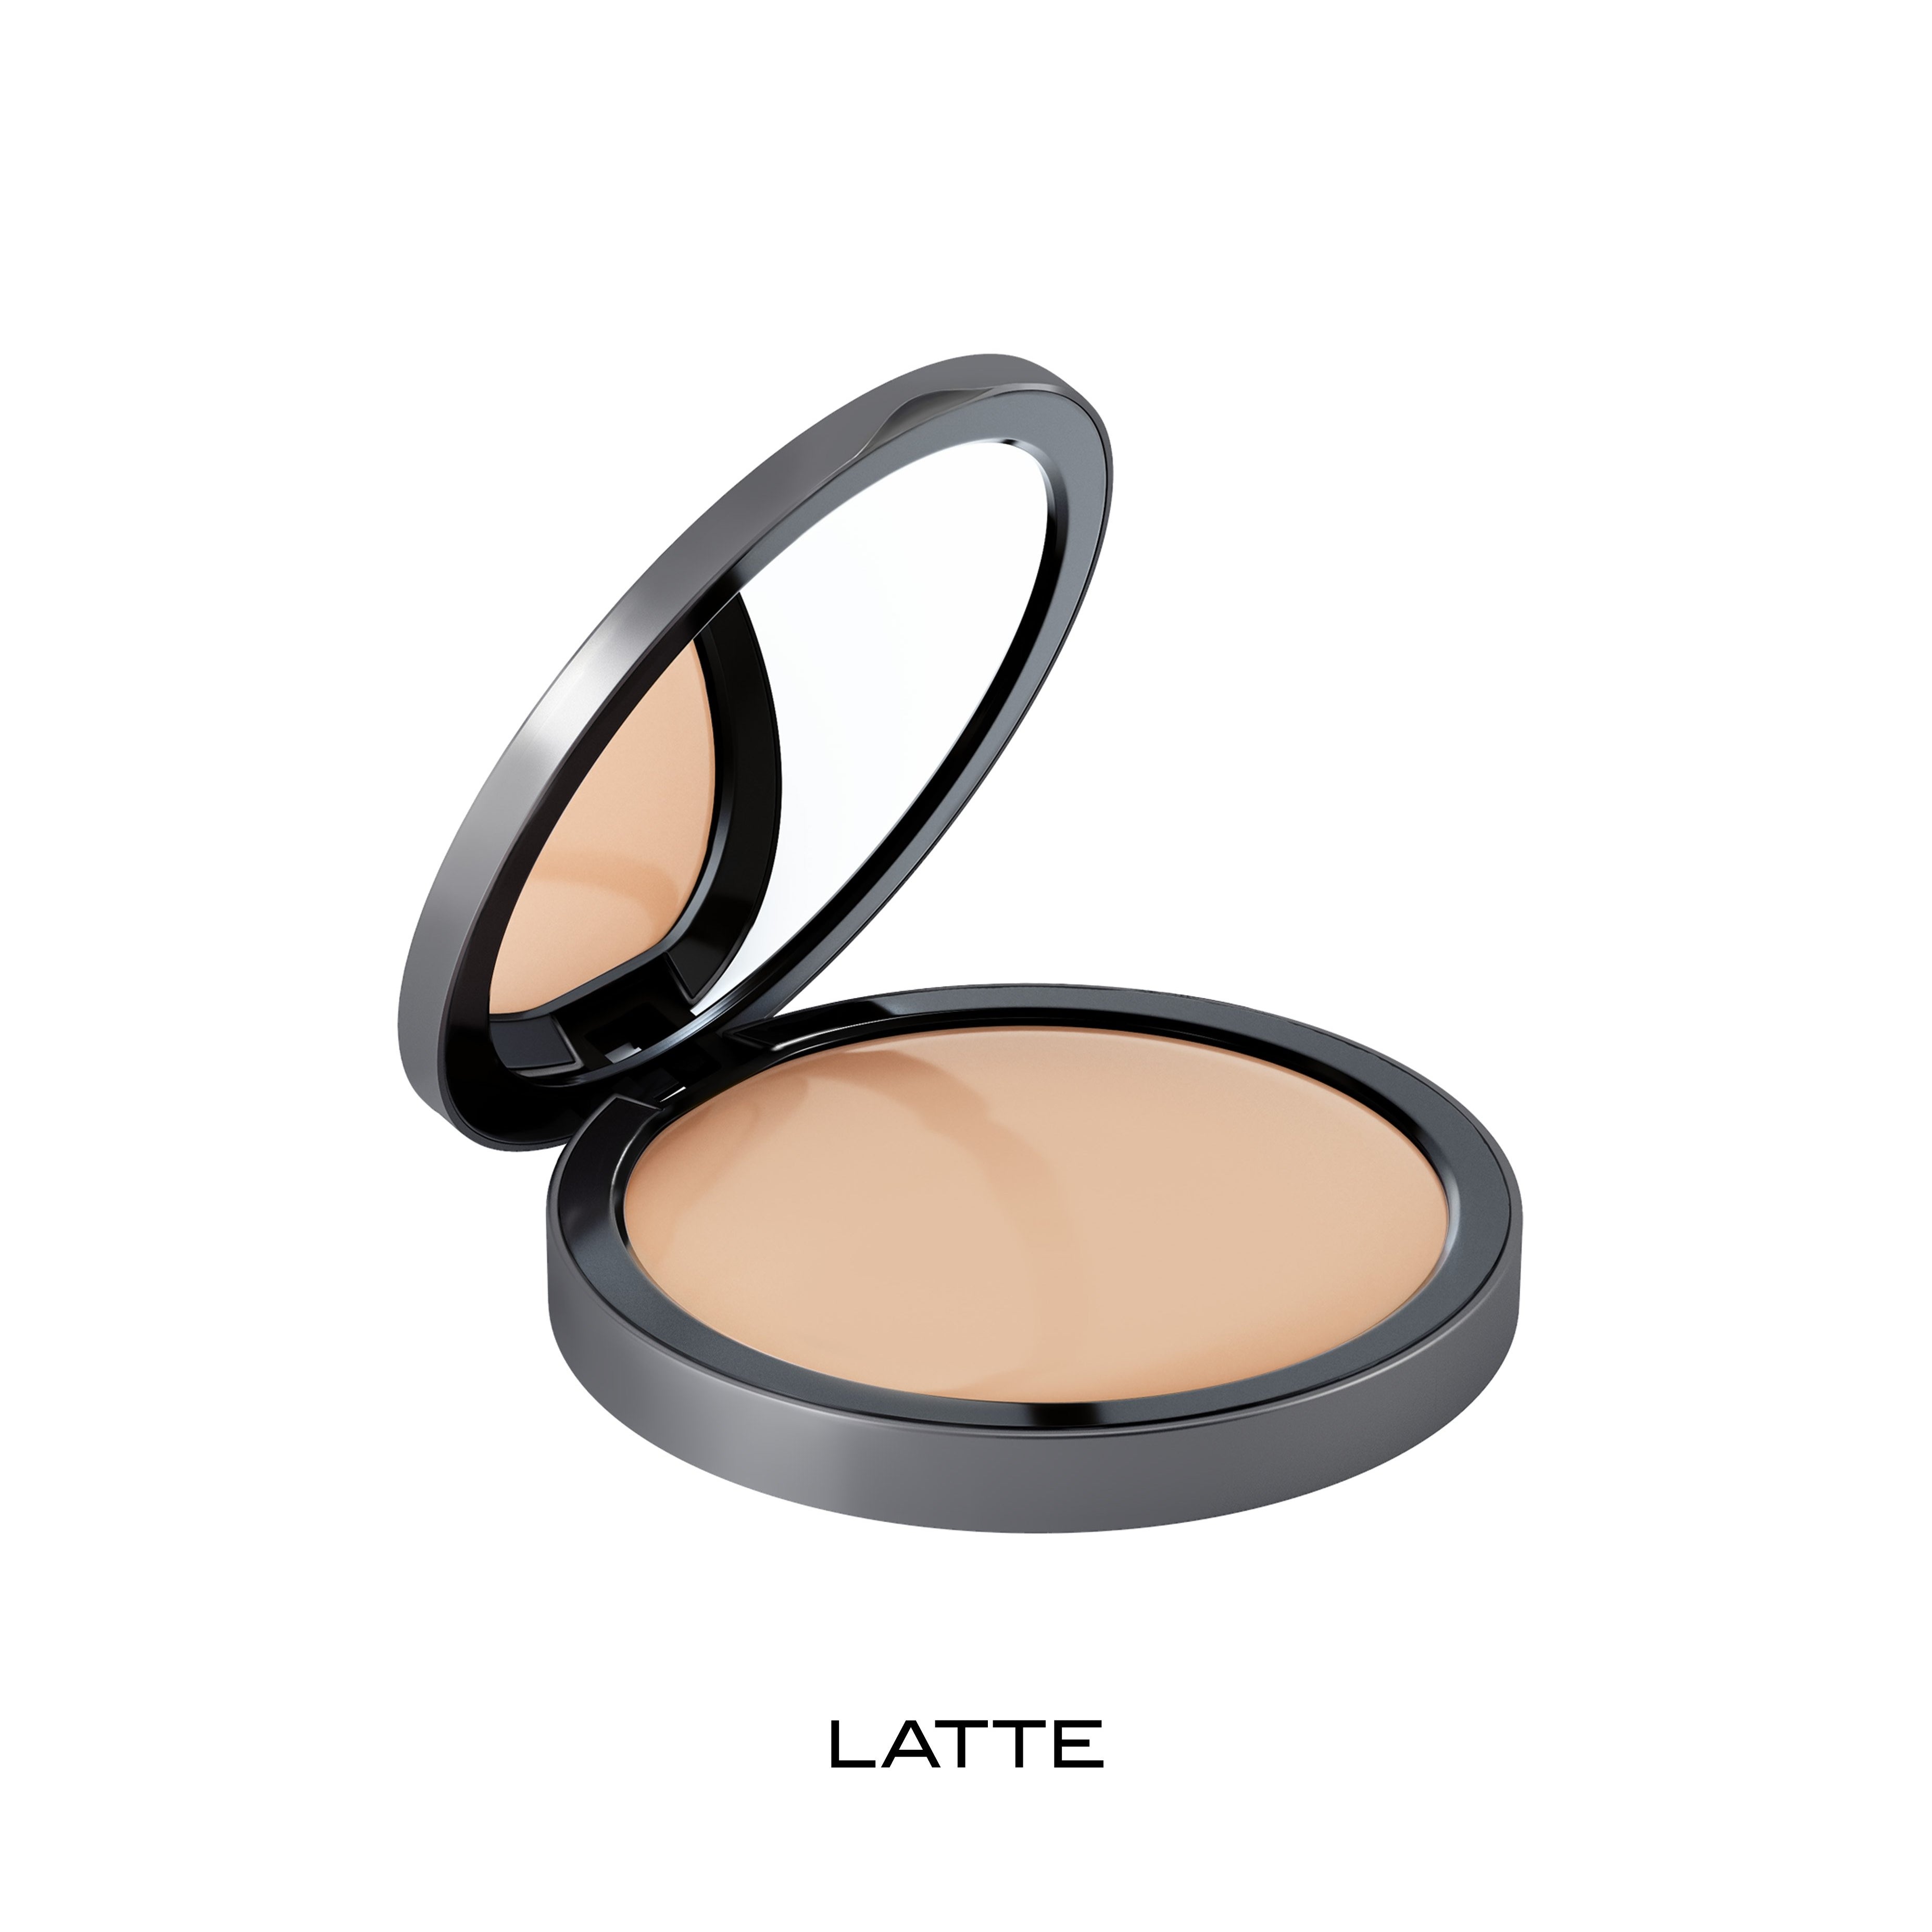 Synergie Skin Mineral Whip Foundation in Latte | skintoheart